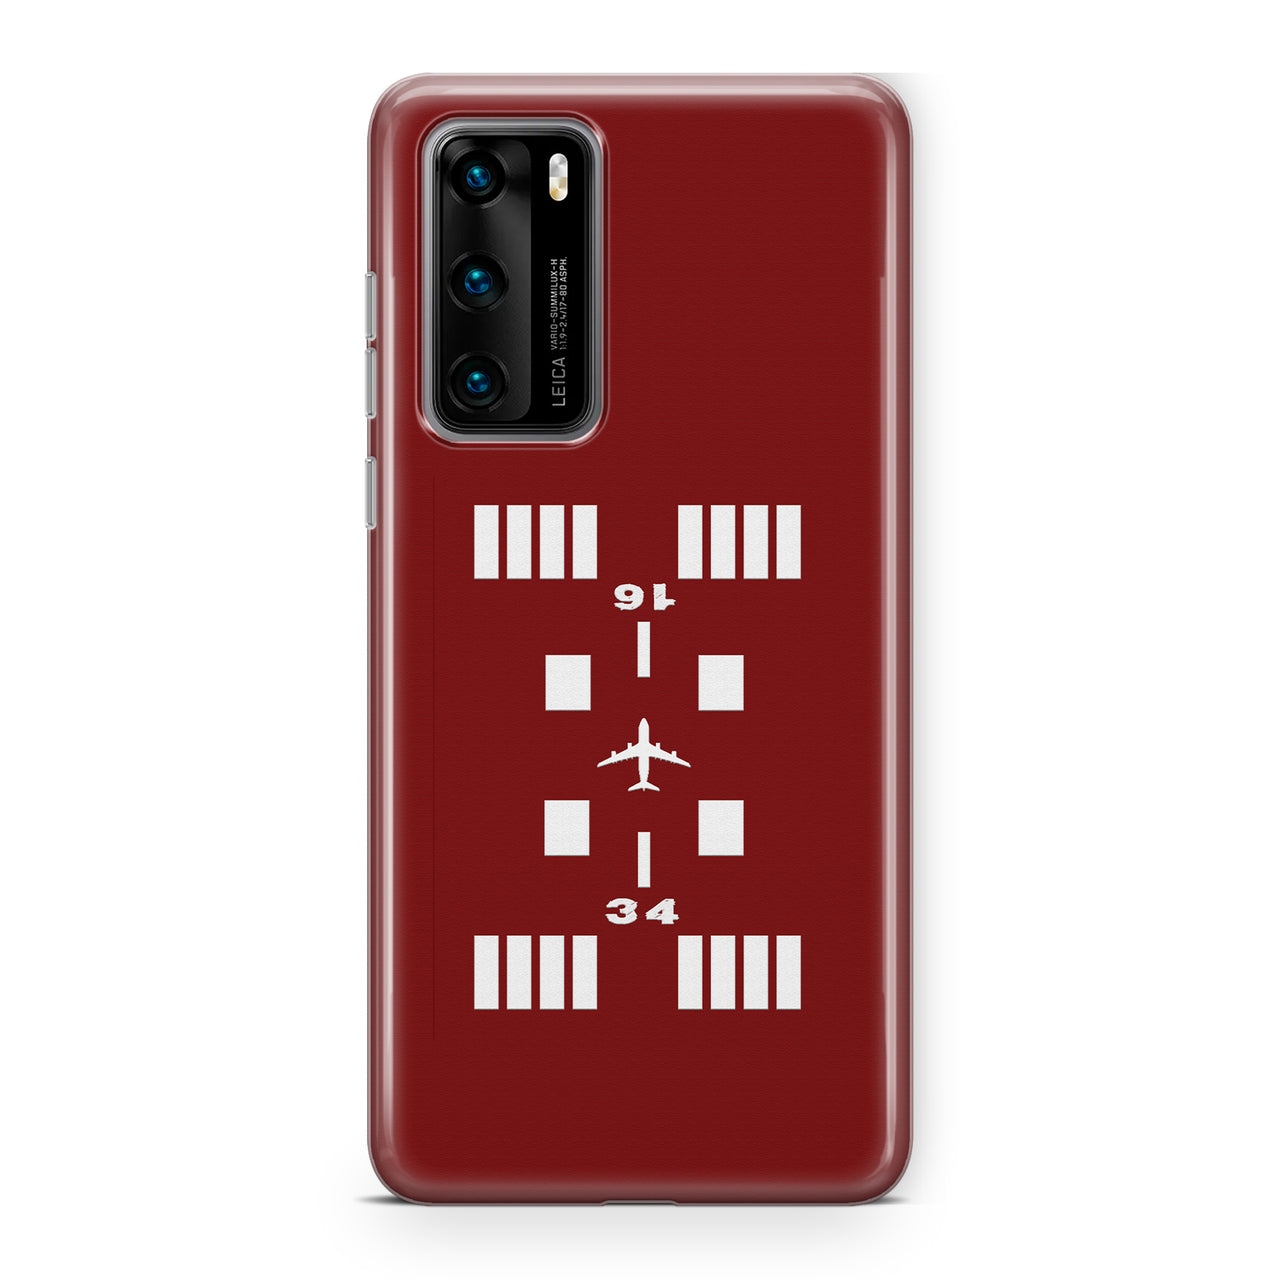 Special Runway-Red Designed Huawei Cases